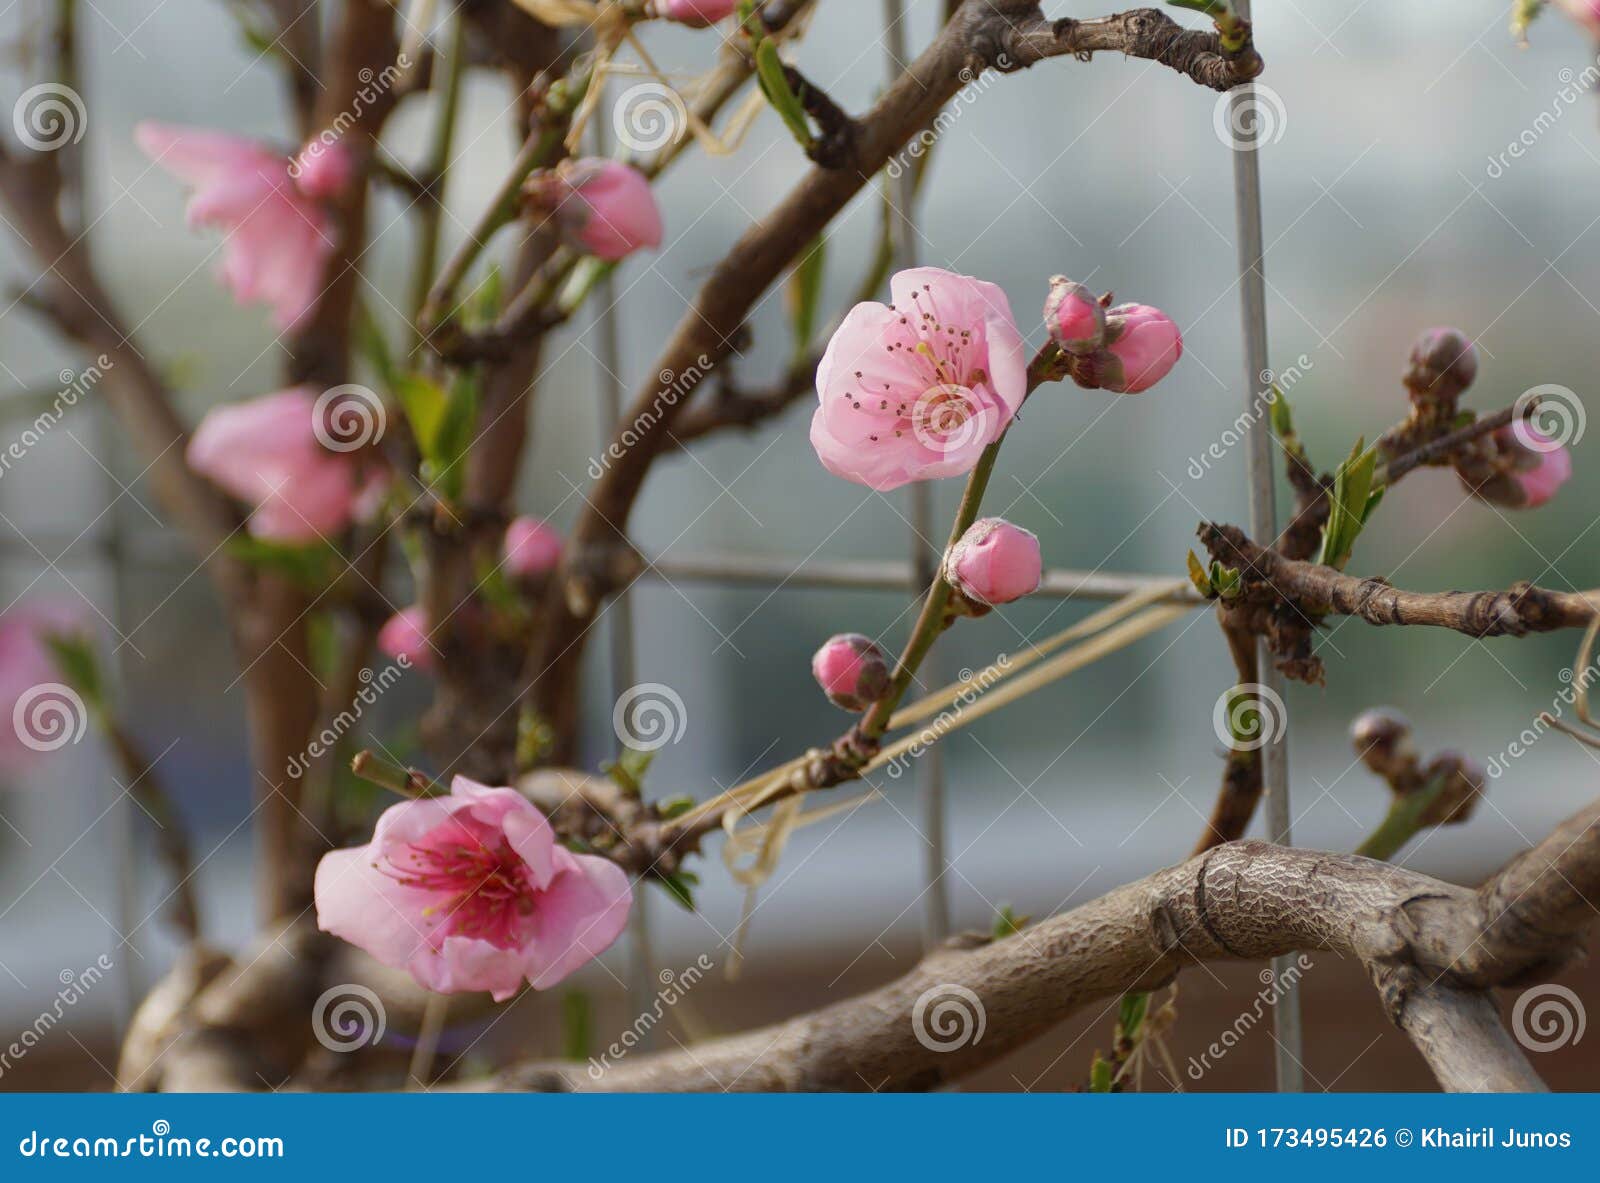 pink nectarine 'fantasia' flowers on the tree in early spring